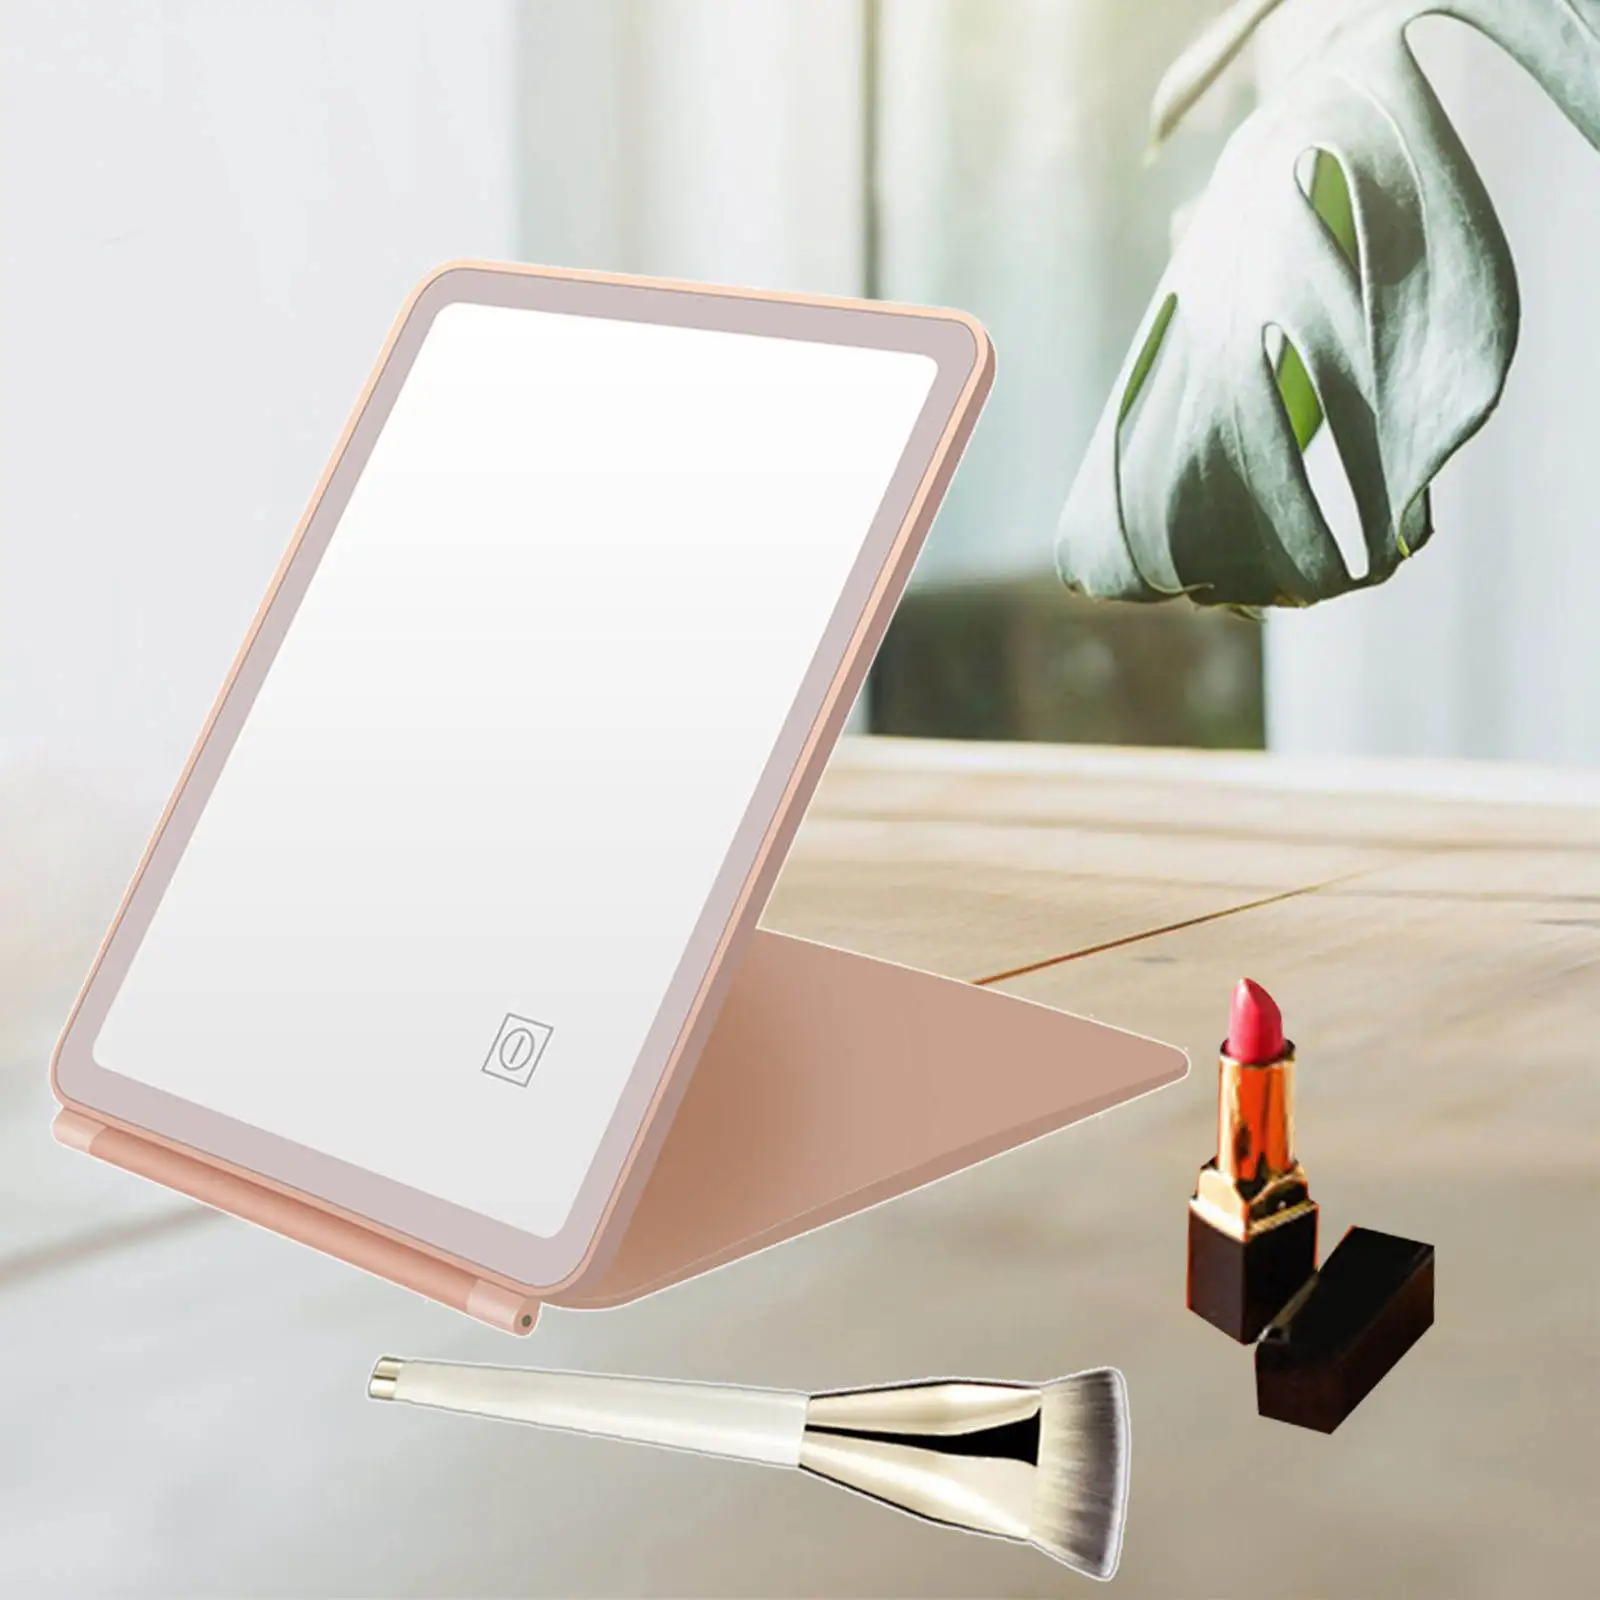 Flip LED Vanity Mirror Touch Screen 120 Adjustable Dimmable Portable Tabletop Mirror for Gift Women Makeup Home Beauty Travel